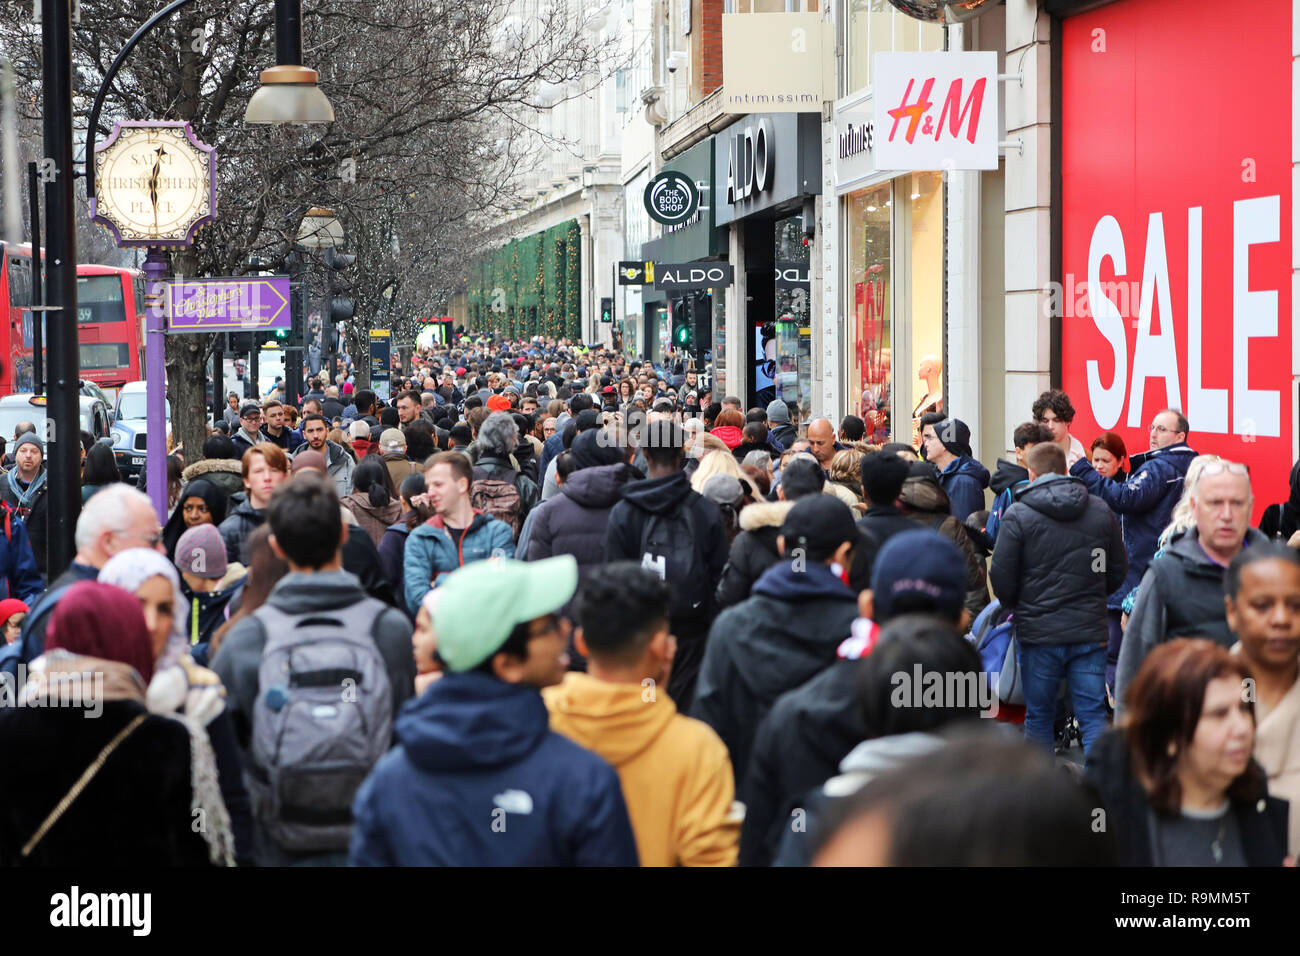 London, UK. 26th December 2018. Crowds shopping at the Boxing Day sales in  Oxford Street, London, England Credit: Paul Brown/Alamy Live News Stock  Photo - Alamy